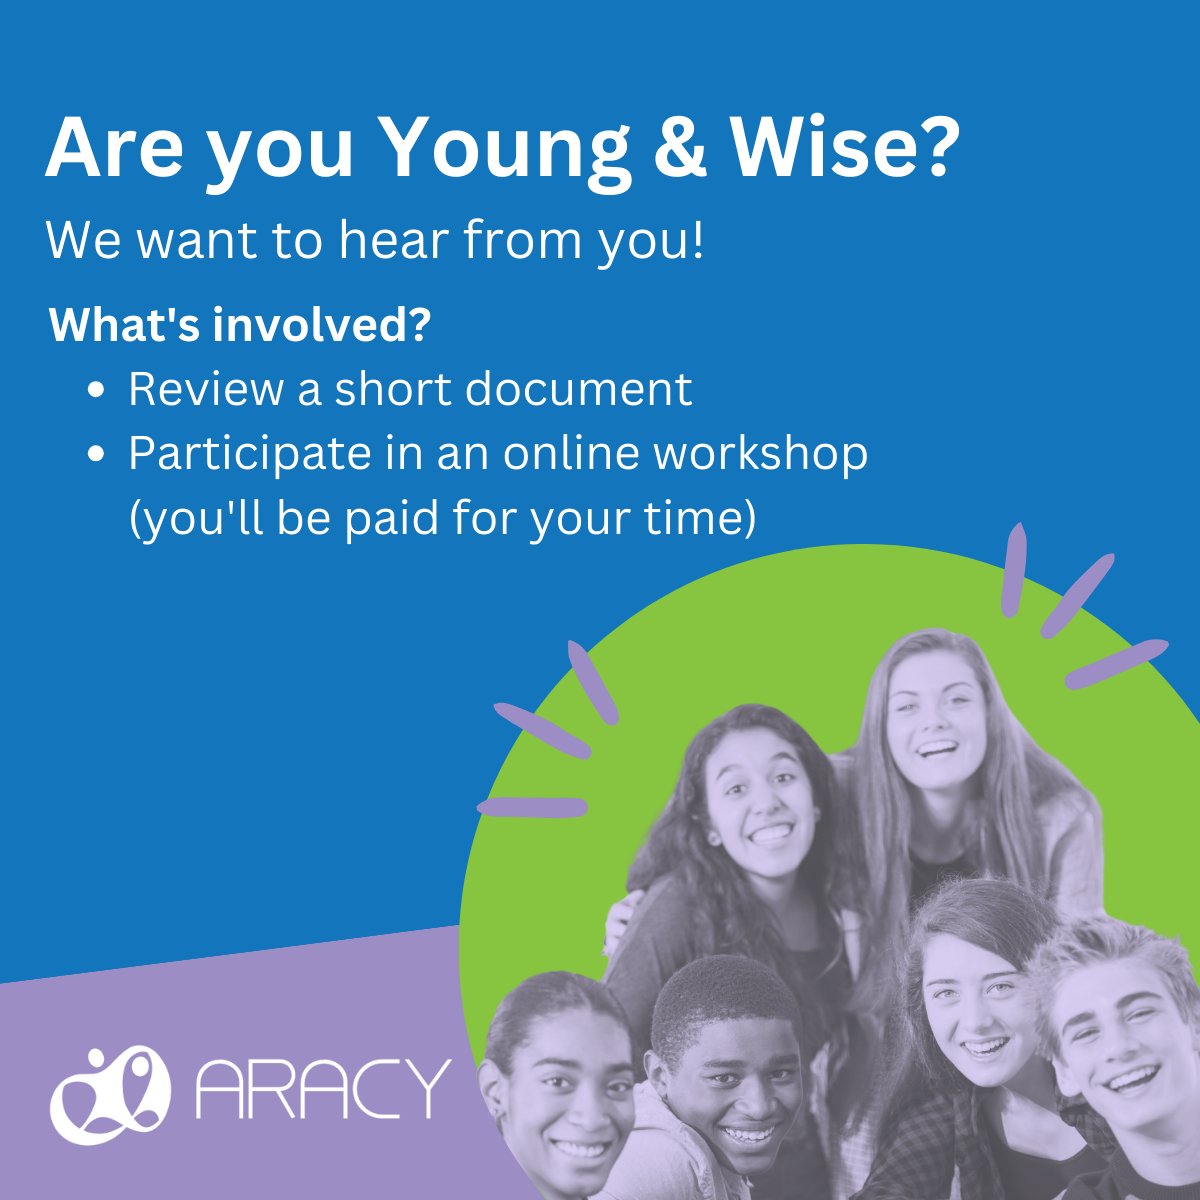 Calling all Young Aussies (16-25)! Want your voice heard? We want to hear what you think young people in Australia need to thrive. Click here if you'd like to be involved in our online workshop (you'll be paid for your time): hubs.la/Q02tSzZ60 #YoungAndWise